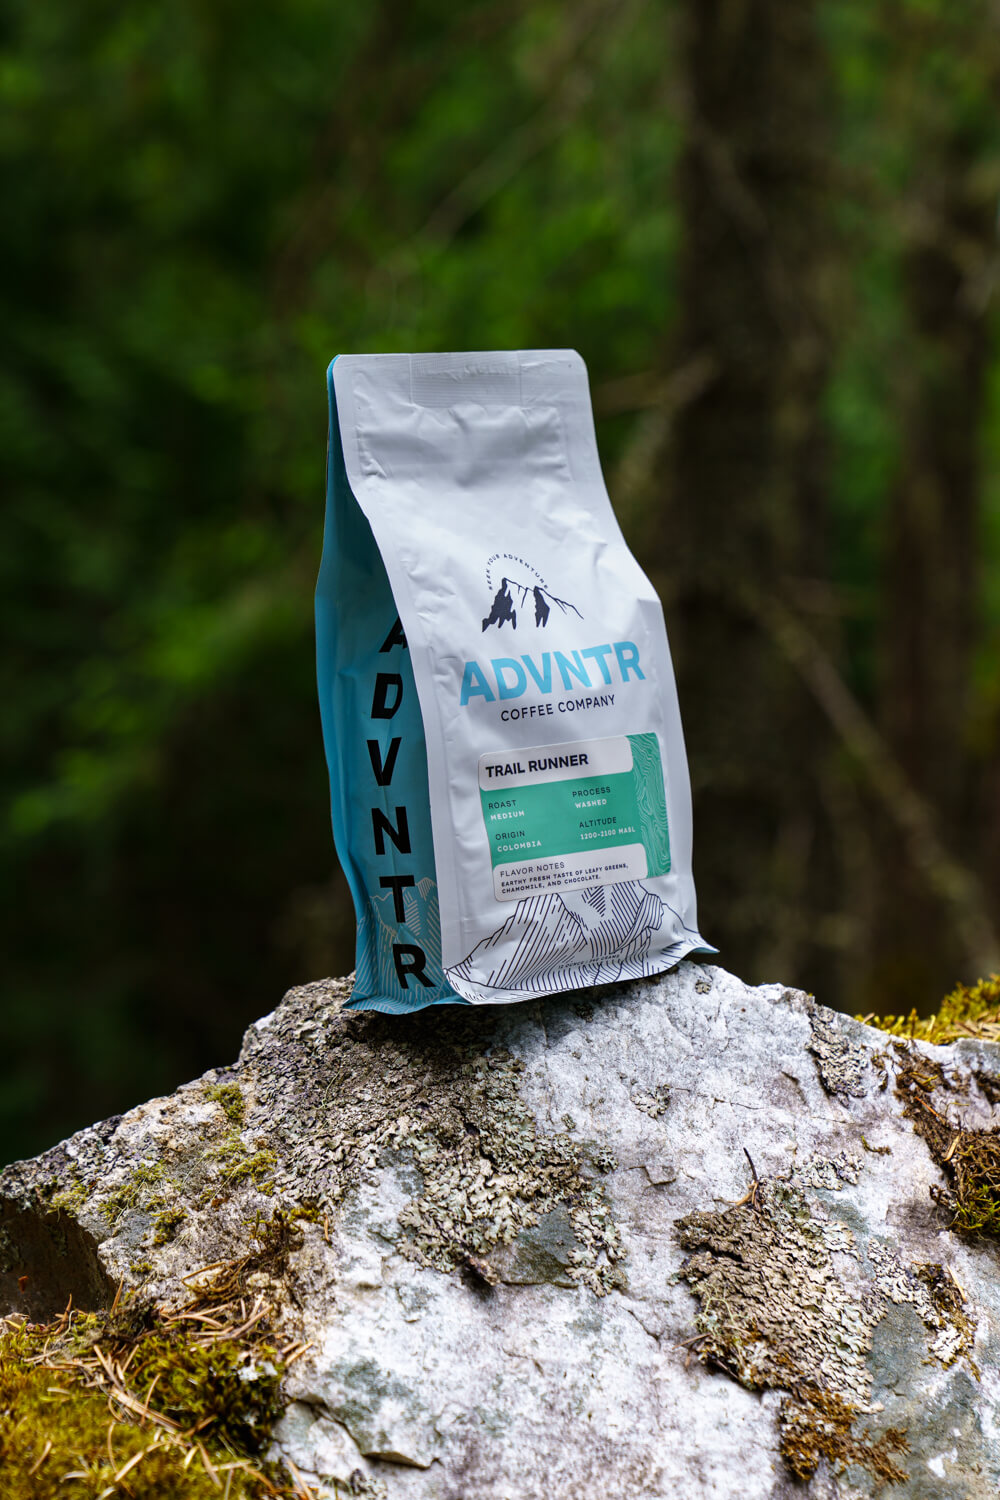 advntr coffee trail runner bag sitting on rock with pnw forest